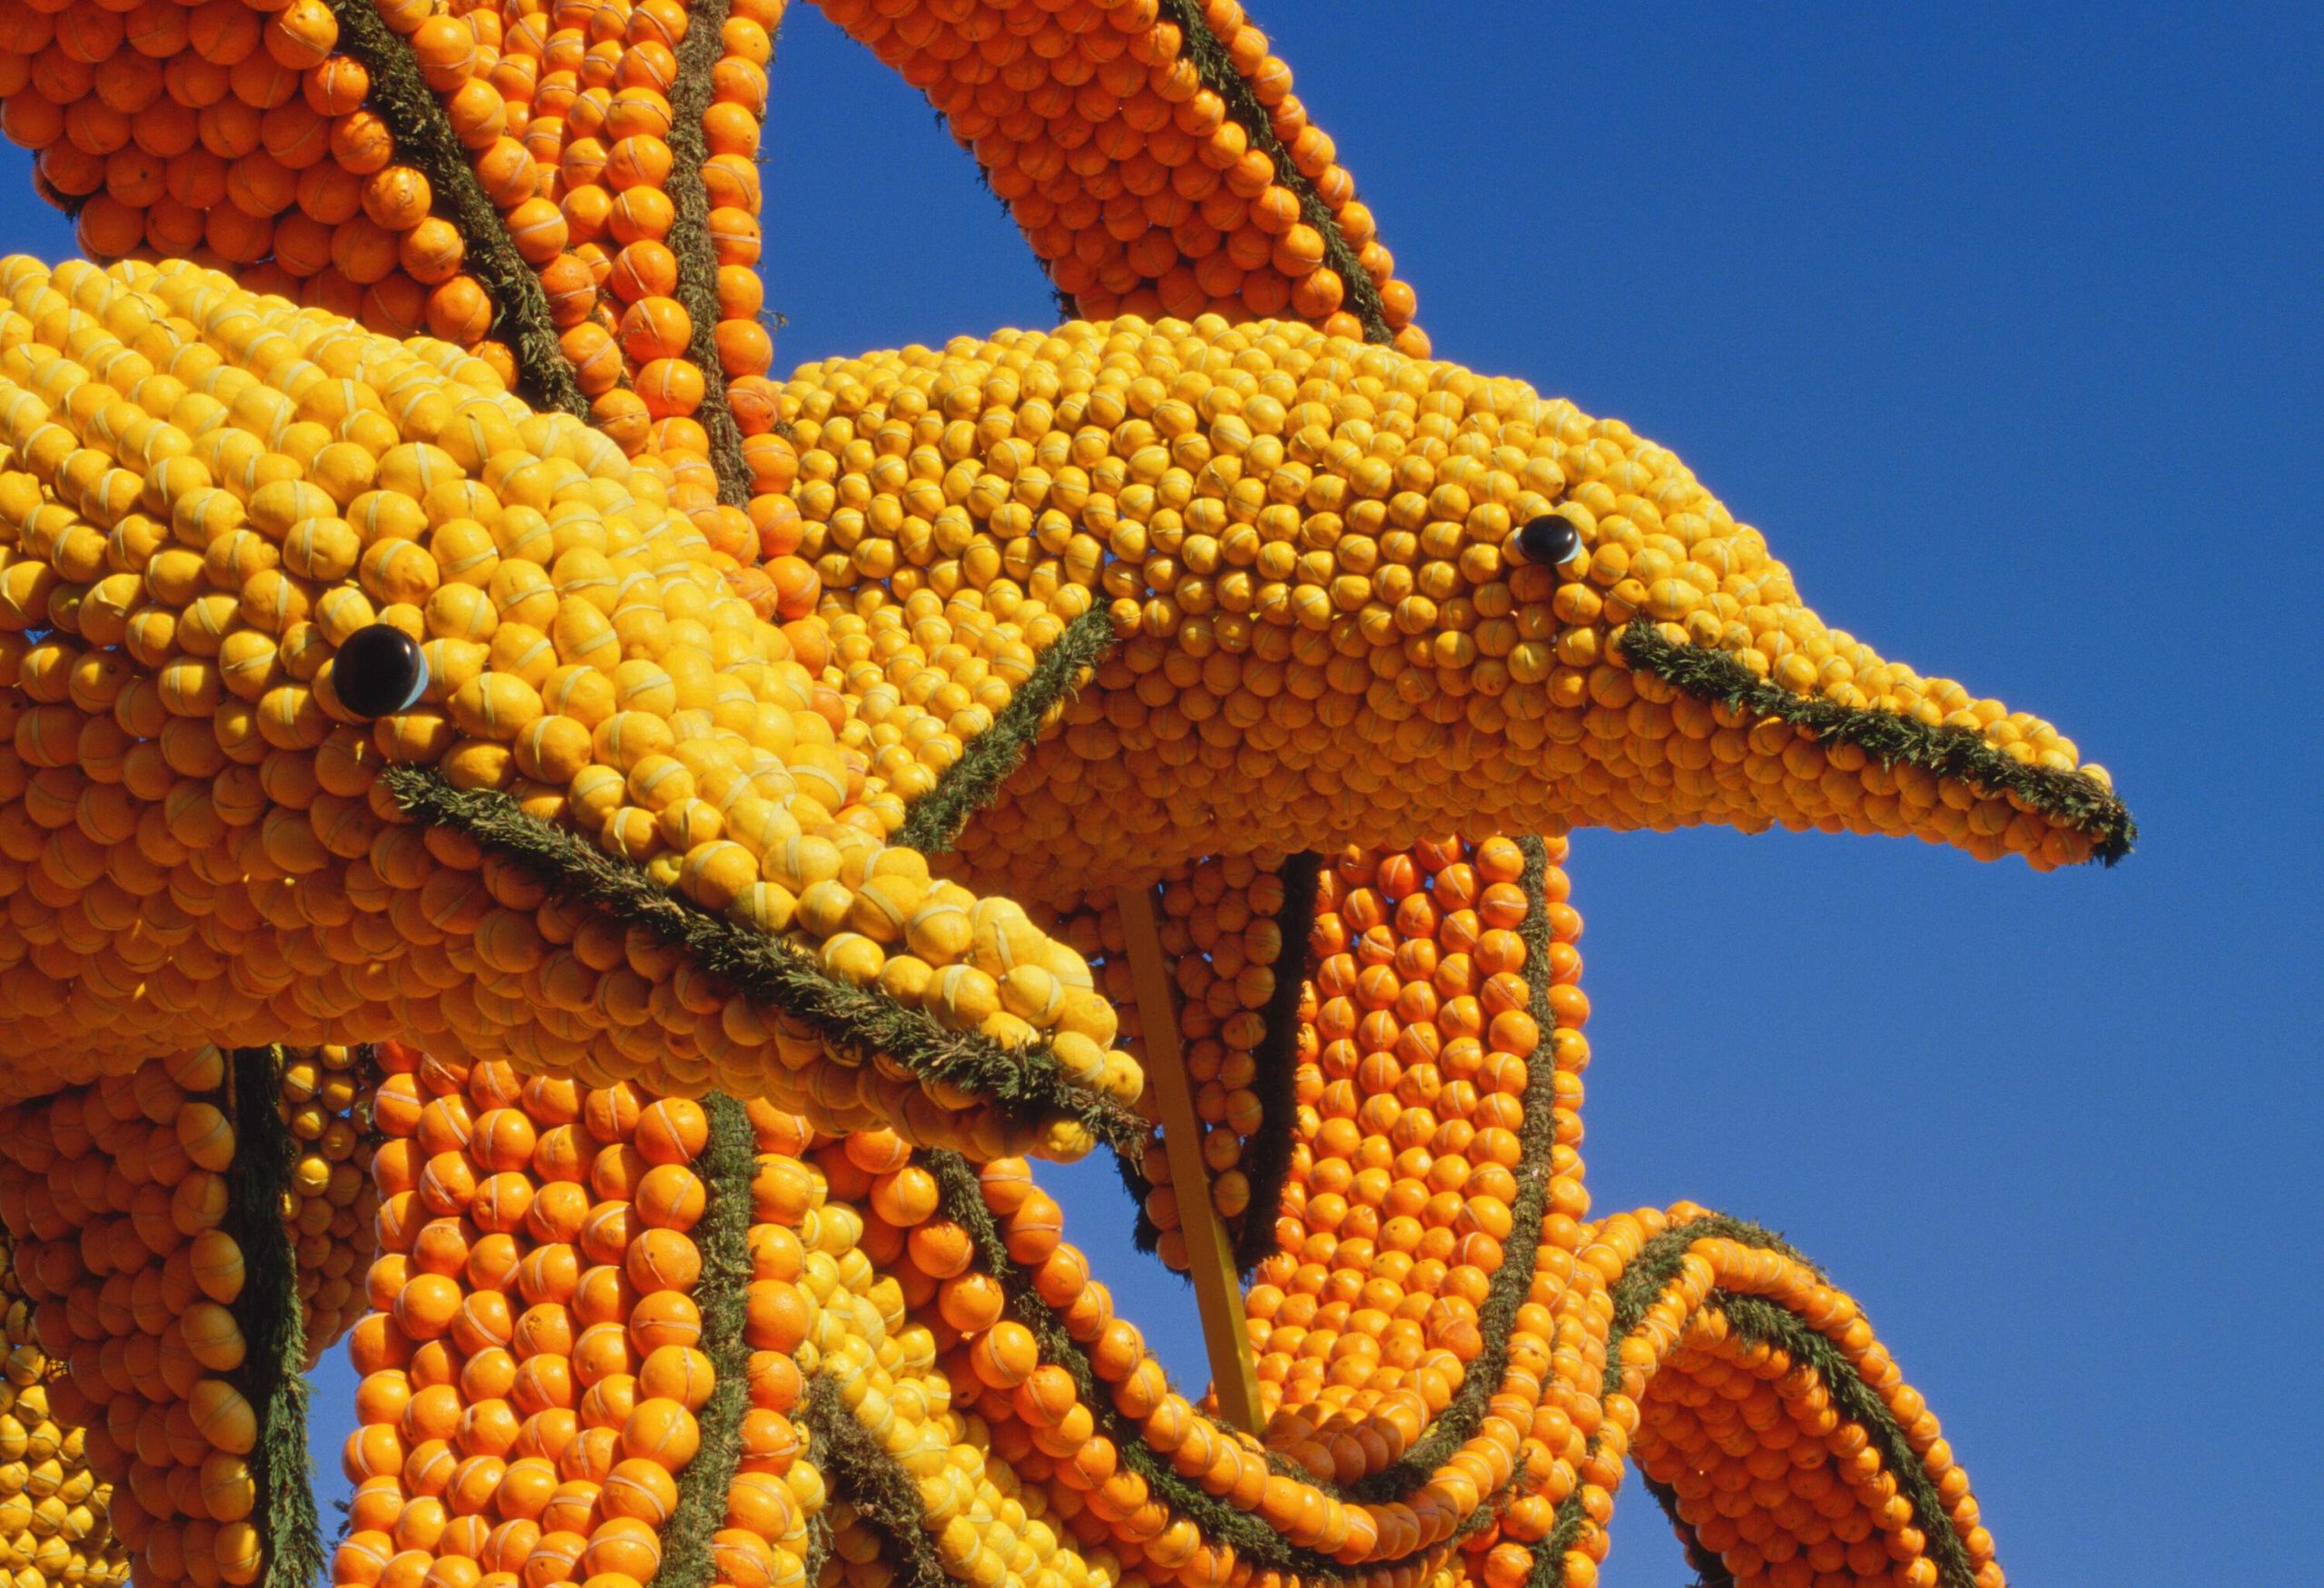 Dolphin shaped scultpure made out of oranges and lemons in Menton's Fete du Citron, France